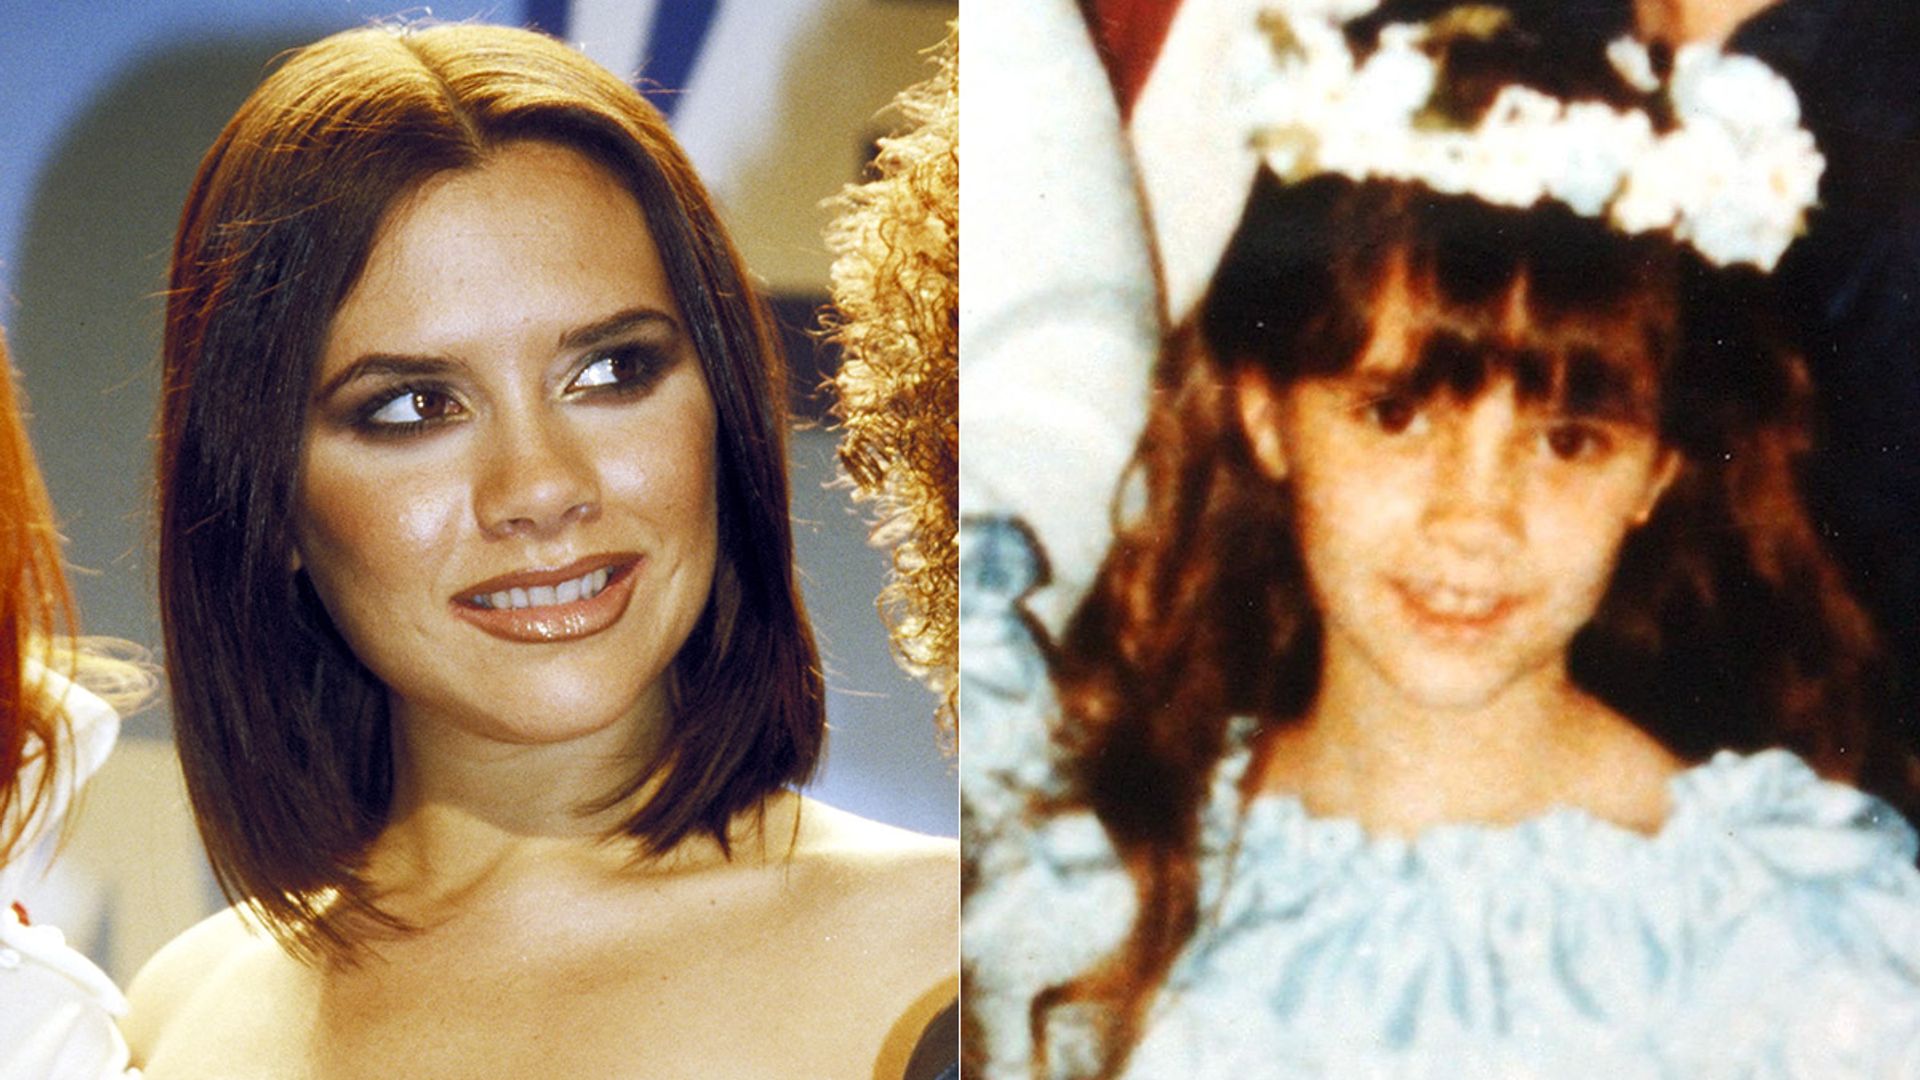 Baby Victoria Beckham looks unrecognisable in beautiful bridesmaid dress